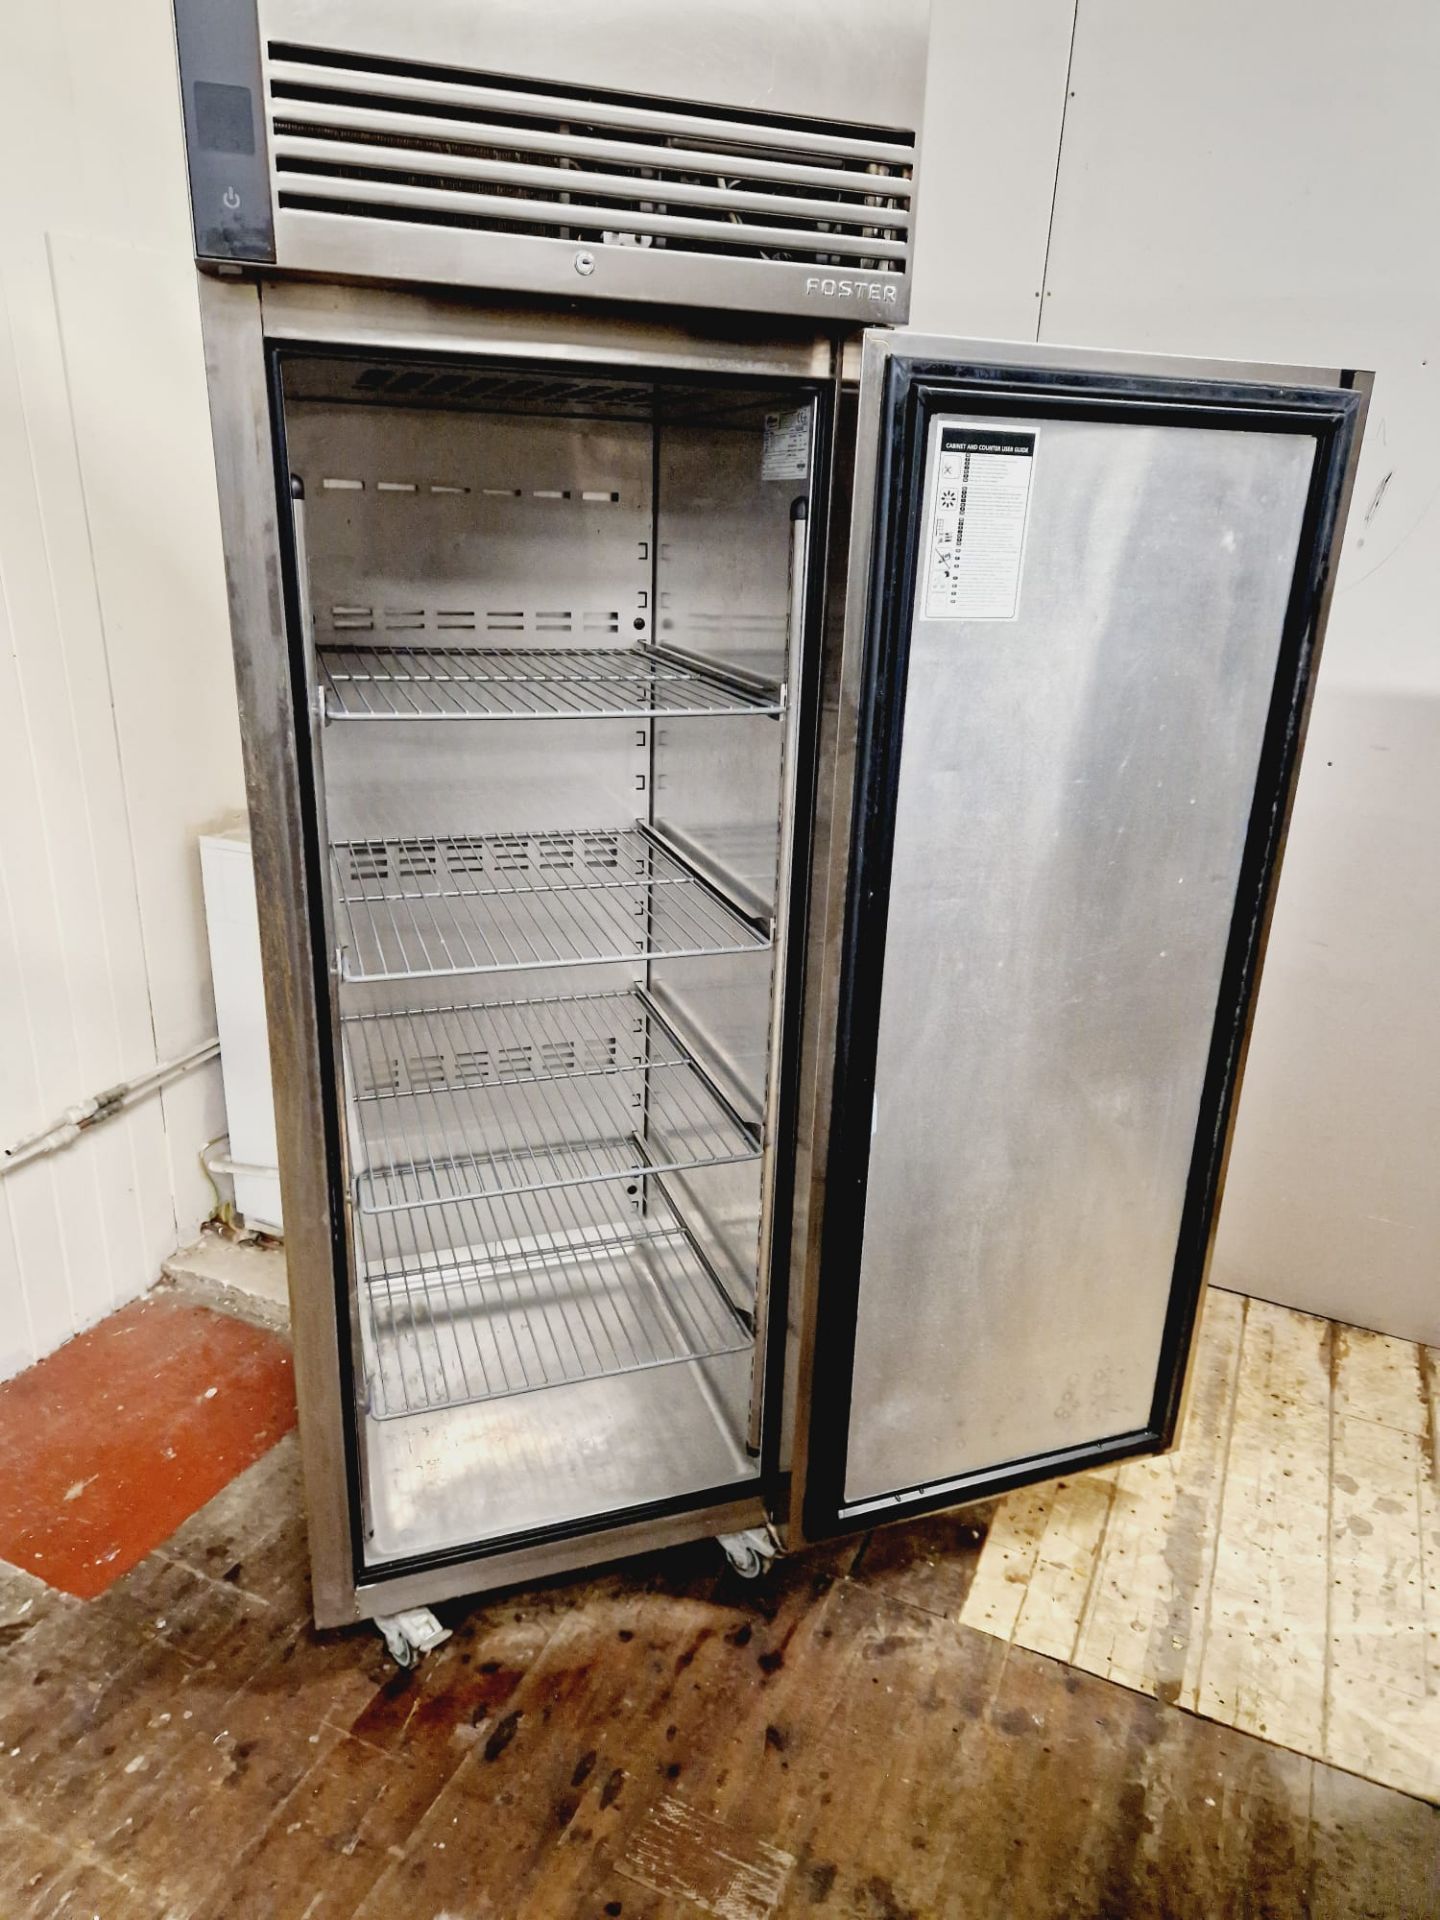 FOSTER G2 UPRIGHT FRIDGE - FULLY WORKING AND SERVICED